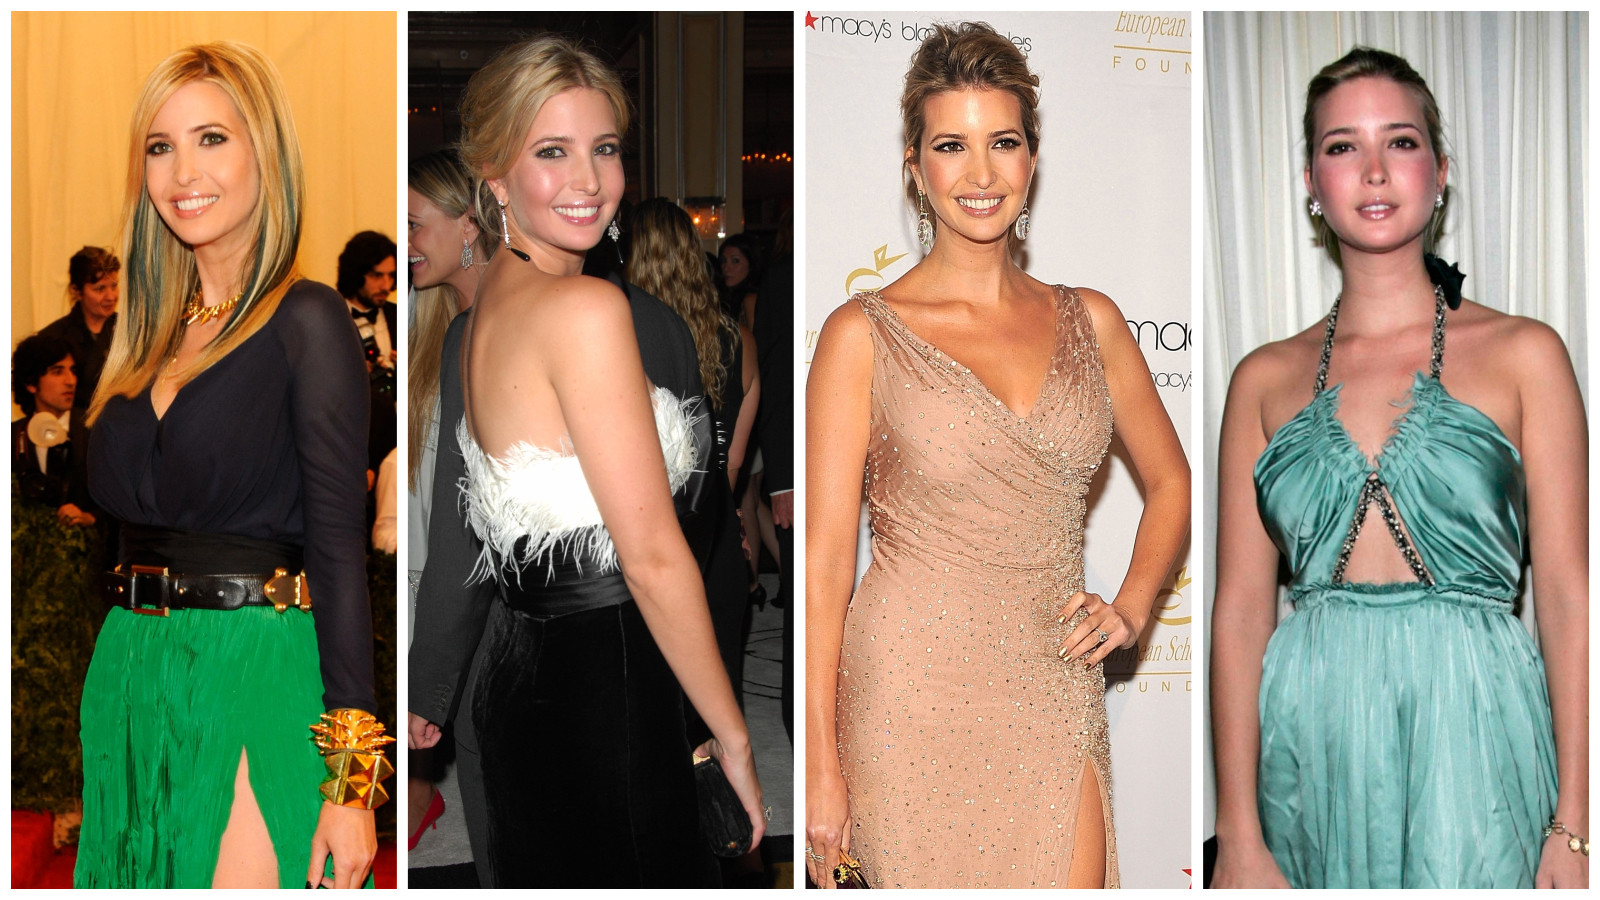 Some of Ivanka’s most daring looks over the years. Photos: WireImage, Patrick McMullan via Getty Images, WireImage, Patrick McMullan via Getty Images